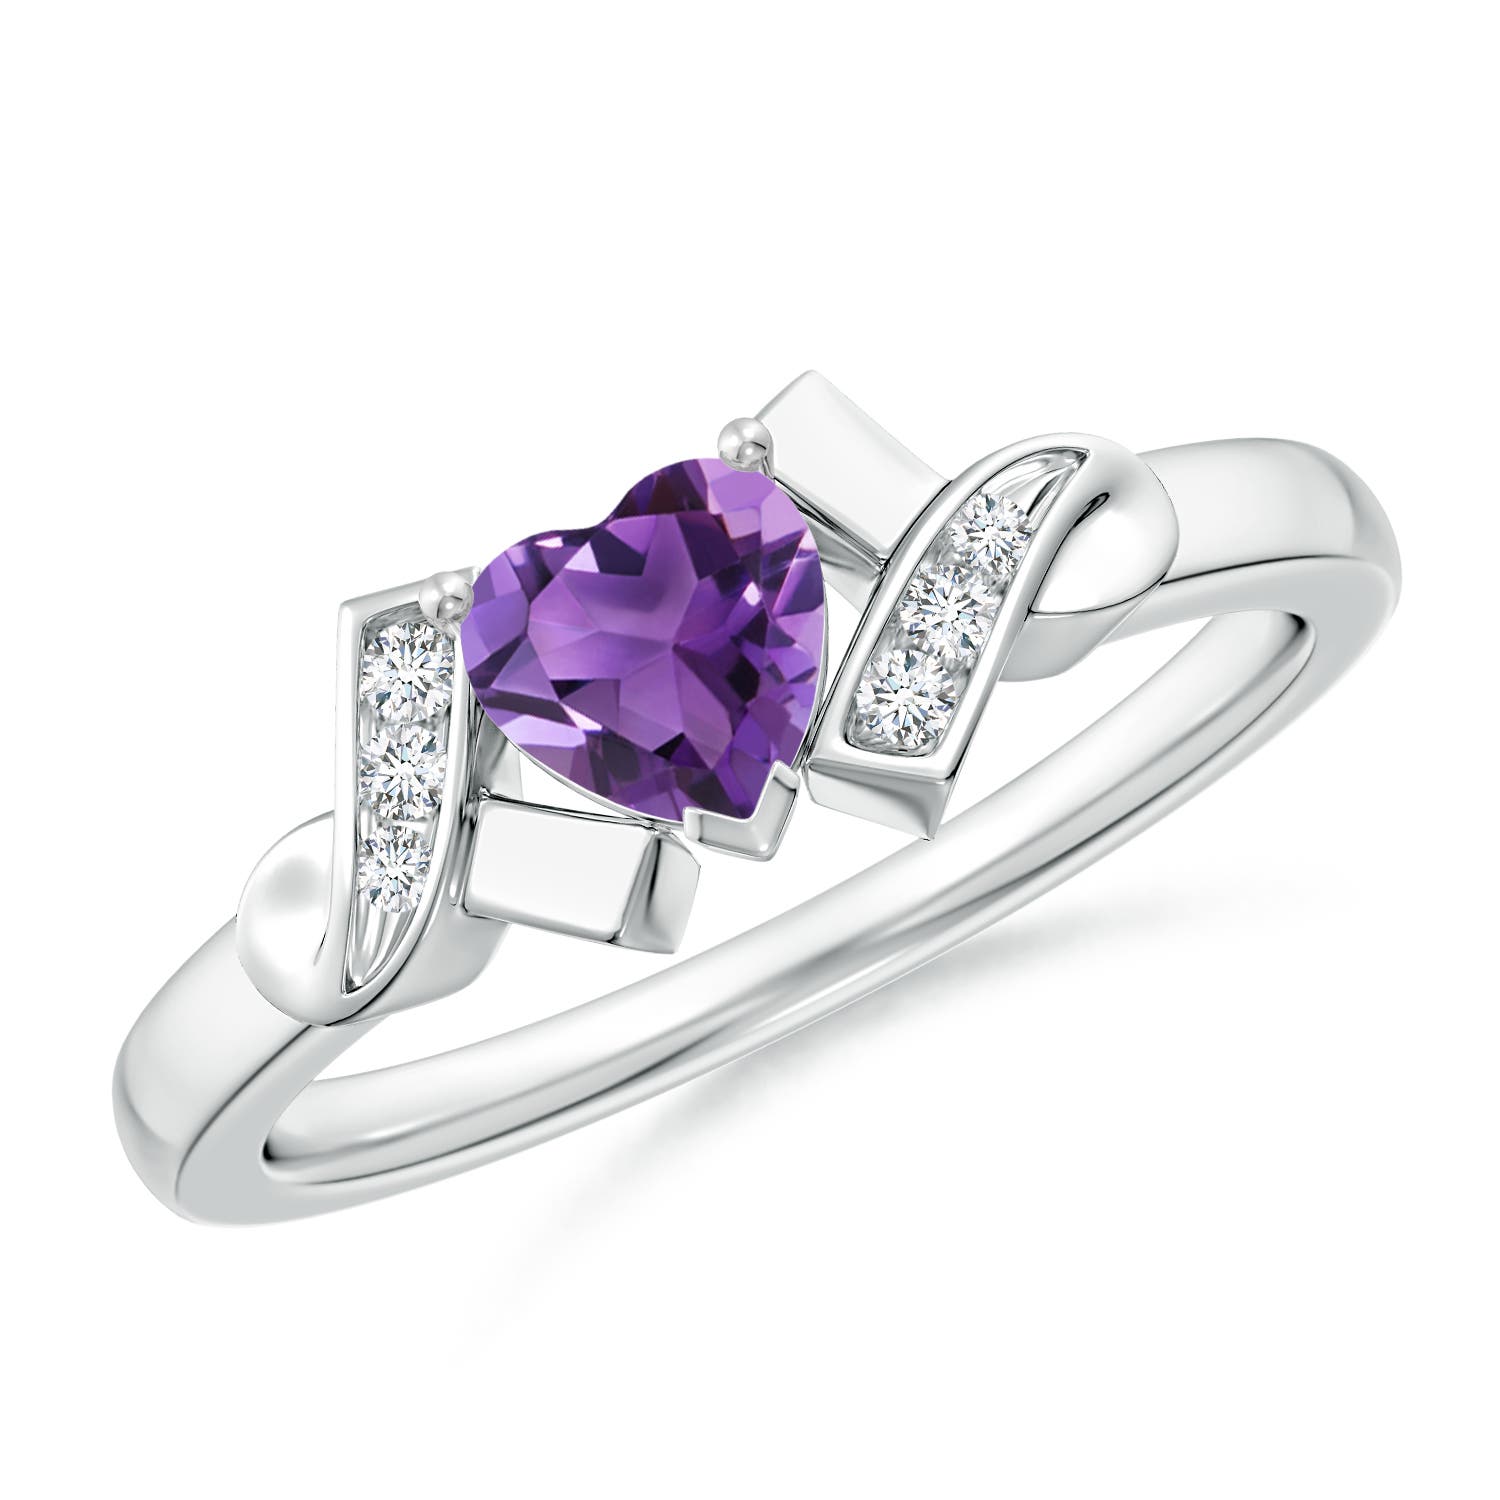 AAA - Amethyst / 0.41 CT / 14 KT White Gold